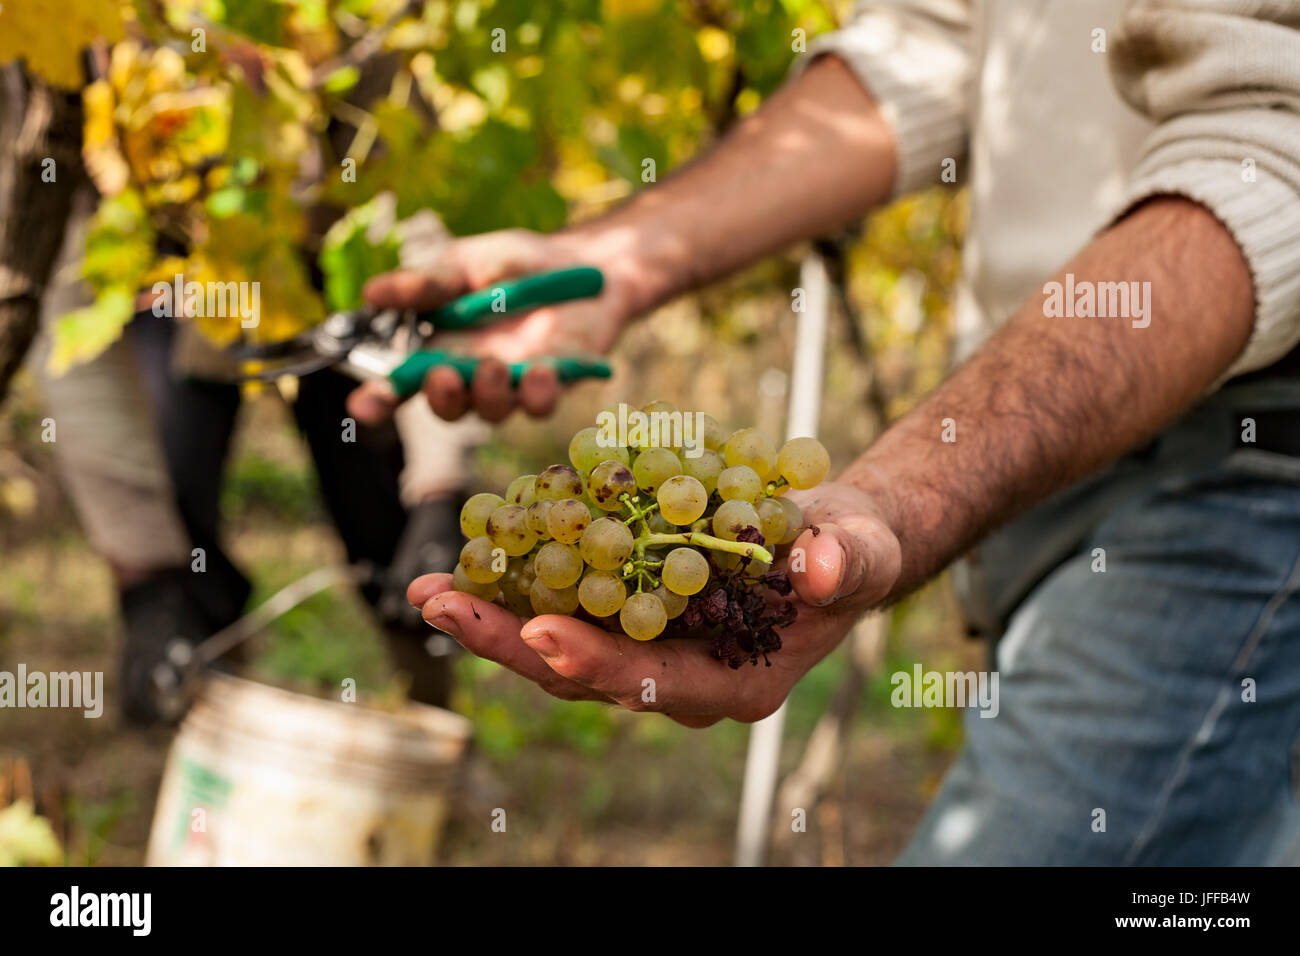 Grape harvester showing a bunch of grapes Stock Photo